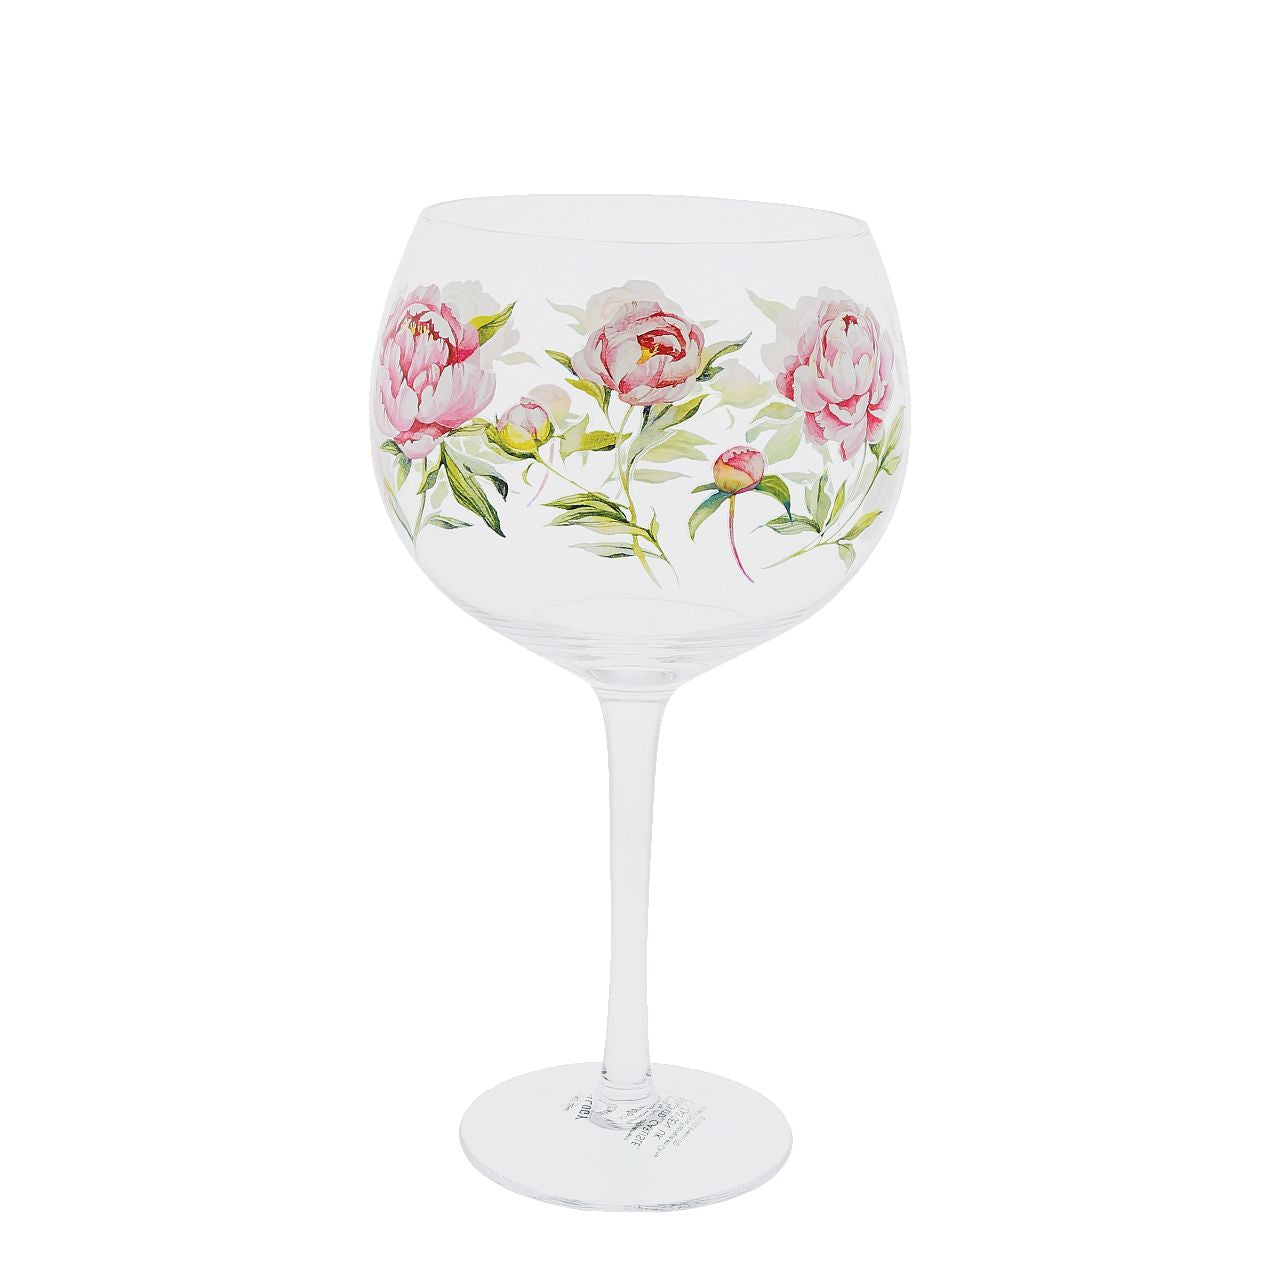 Ginology Peonies Copa Gin Glass  Embody romance, prosperity, good luck and bravey through our Peonies Copa Gin Glass. A glass that can be given to a friend, loved one, graduate or a pick me up gift. It is perfect paired with their favourite bottle of gin.